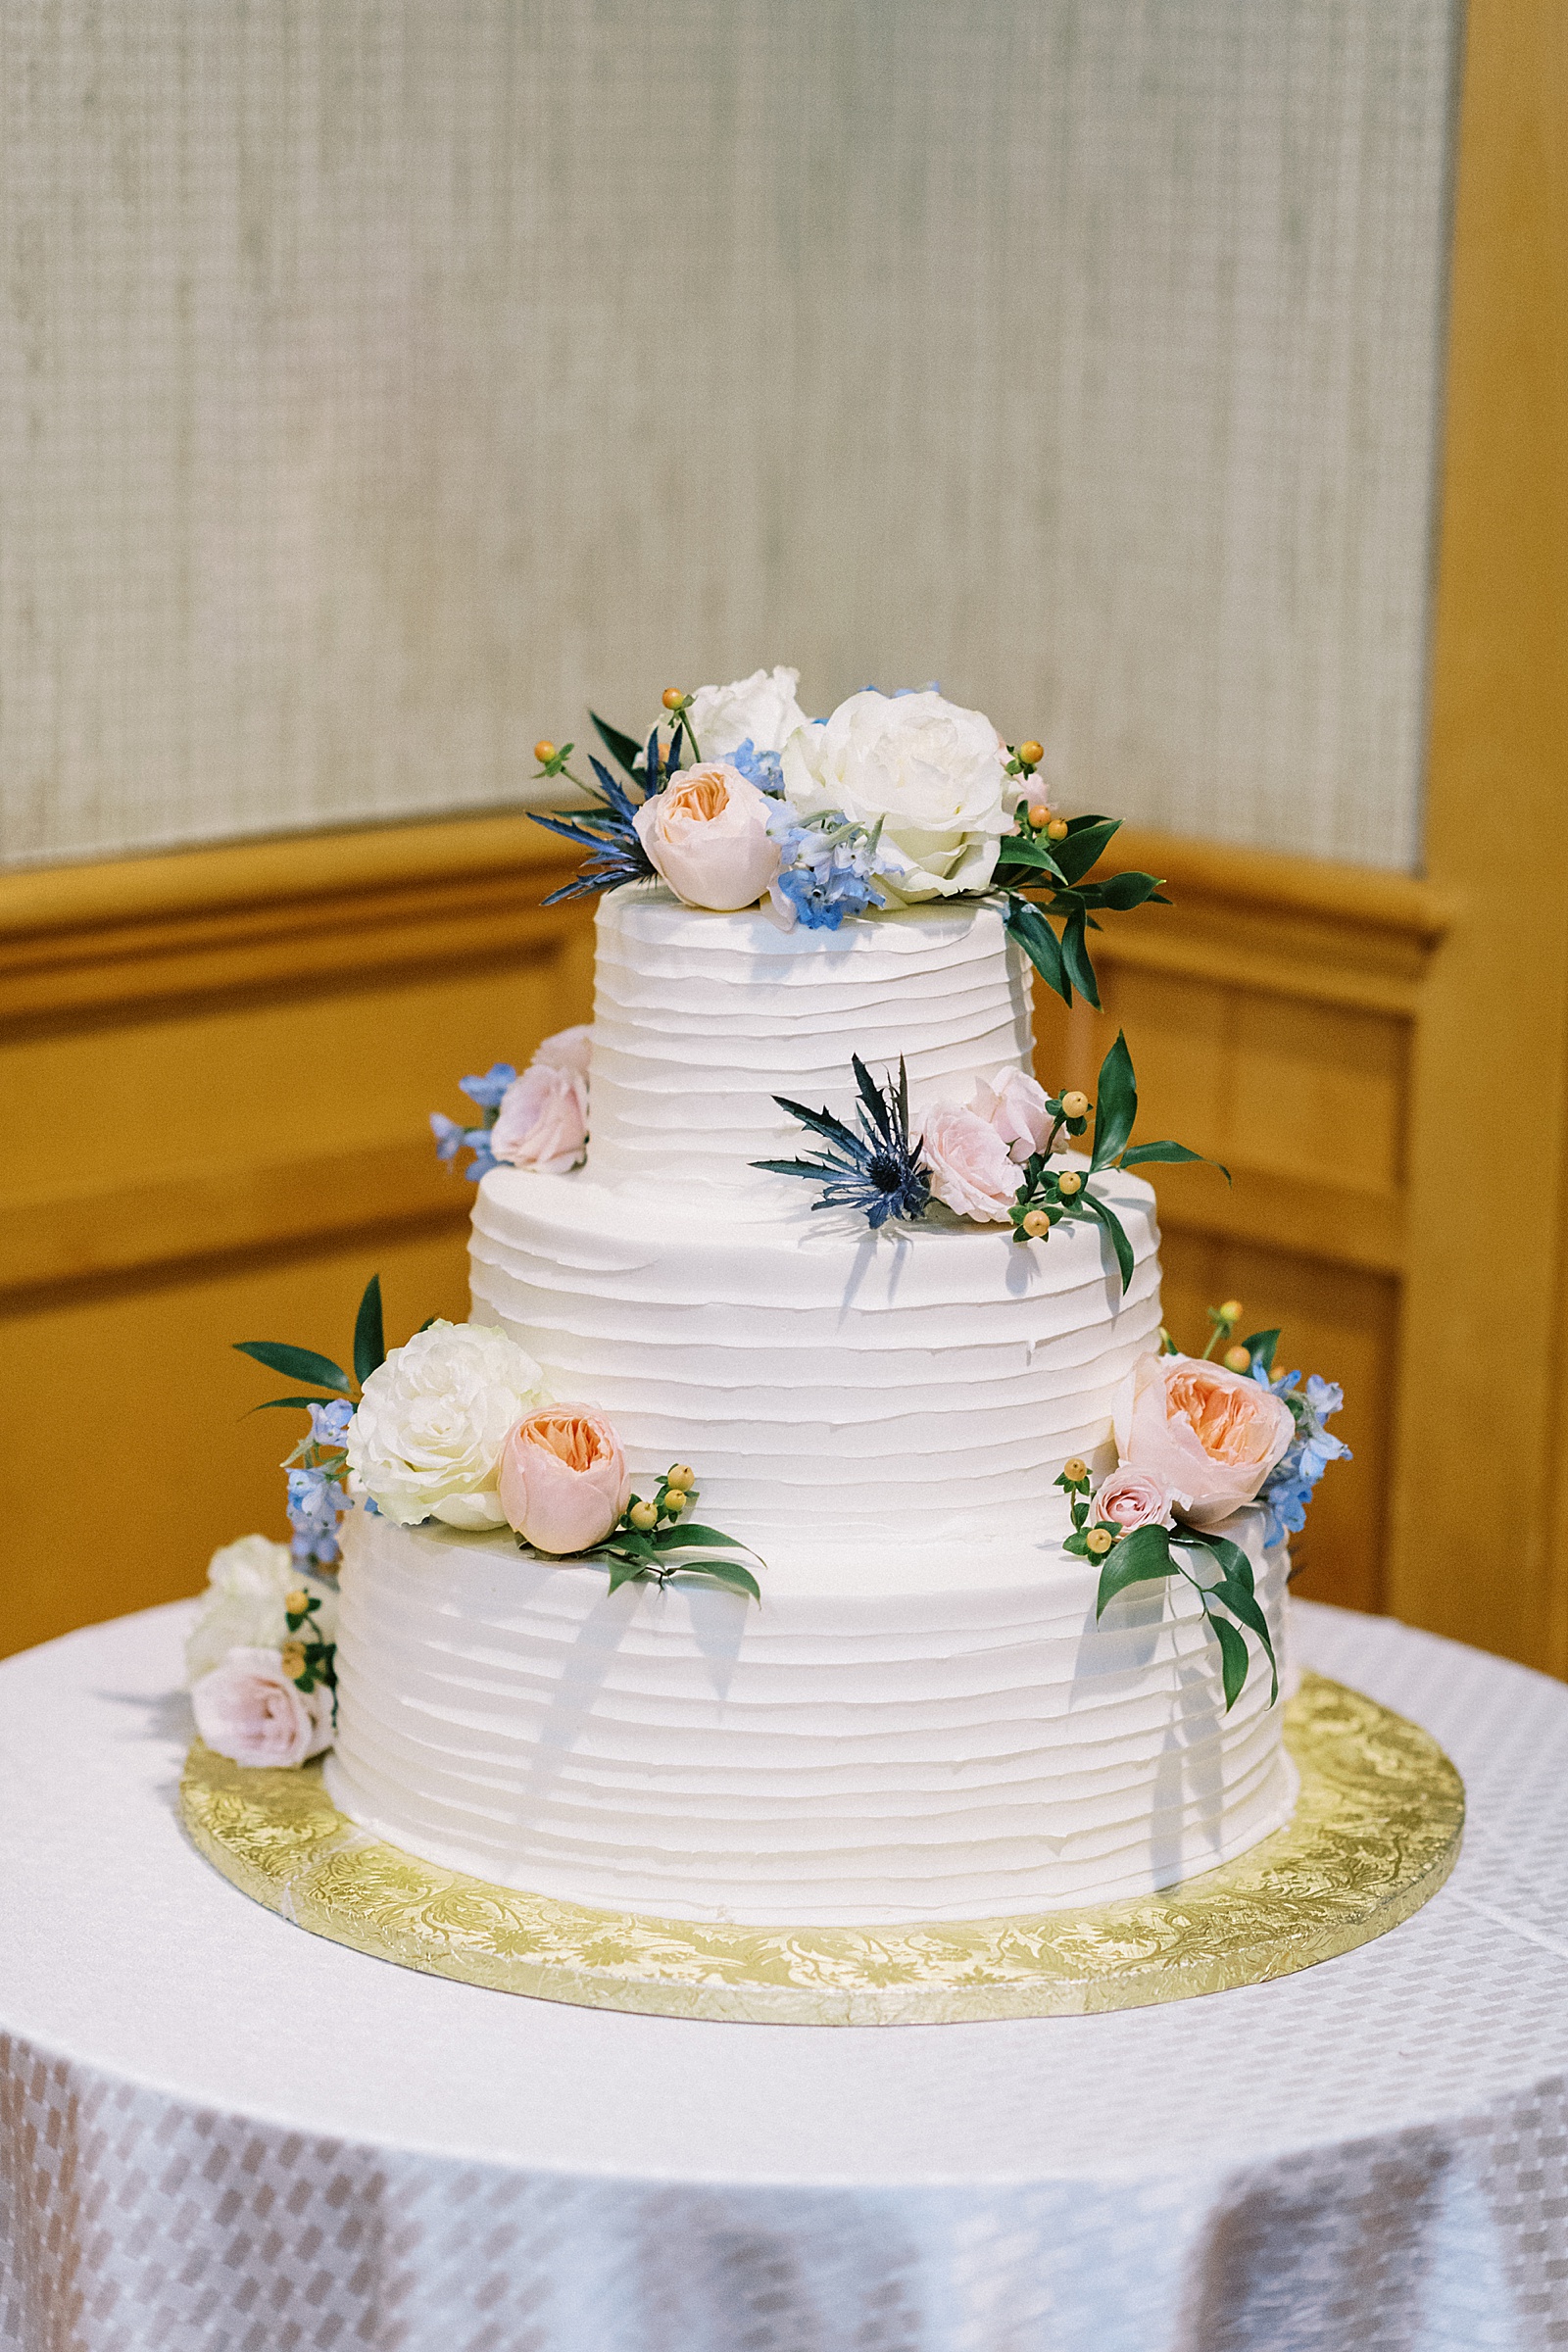 Three tier white cake with peach and blue flowers